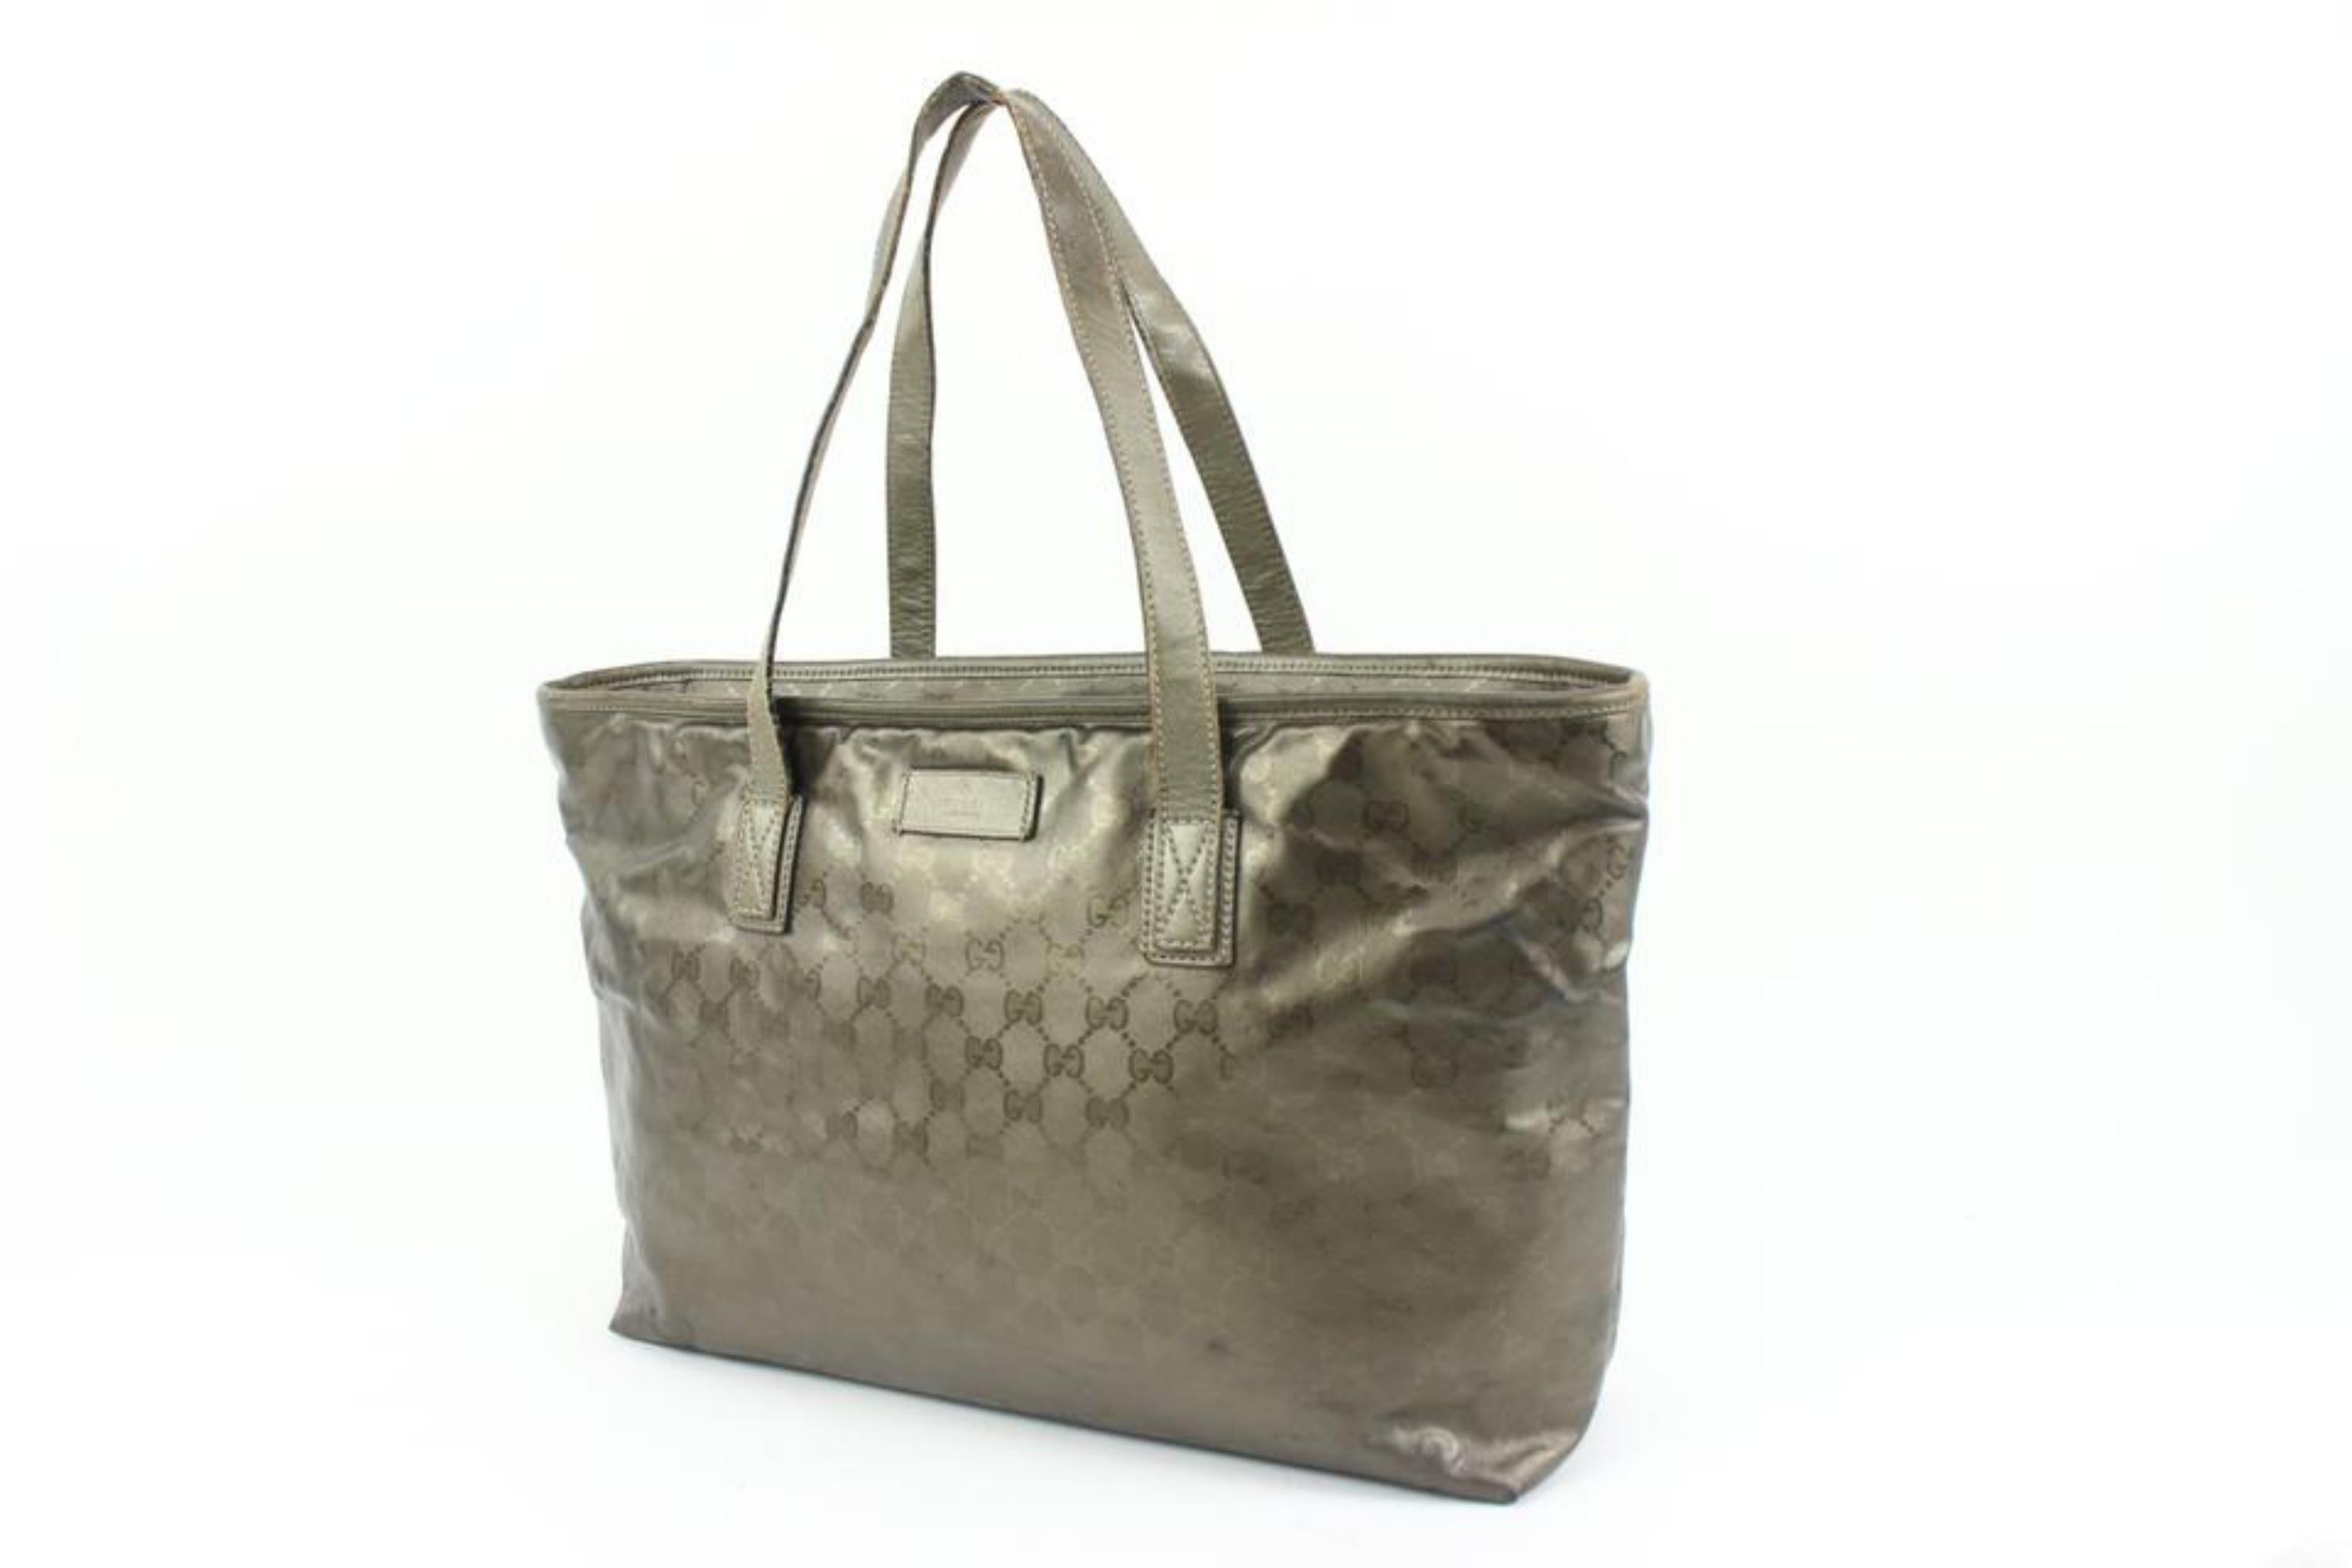 Gucci Pewter Silver Imprime Monogram Medium Zippered Shopping Tote 12g419s
Date Code/Serial Number: 211137 492174
Made In: Italy
Measurements: Length:  18